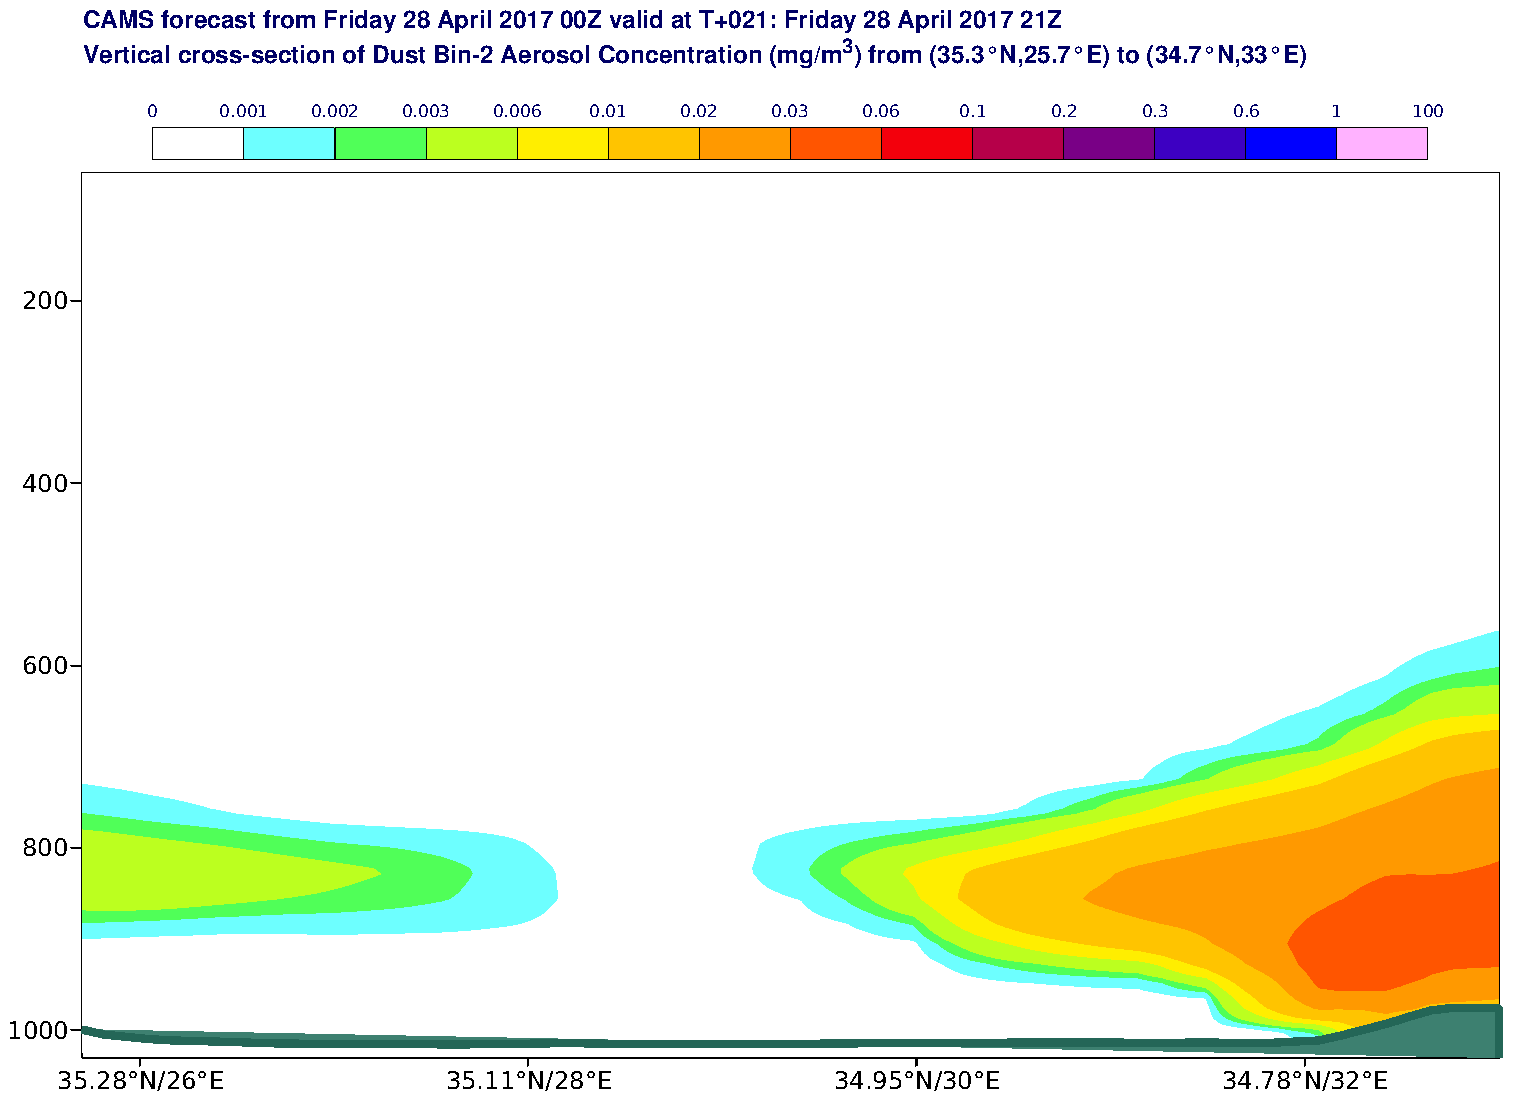 Vertical cross-section of Dust Bin-2 Aerosol Concentration (mg/m3) valid at T21 - 2017-04-28 21:00